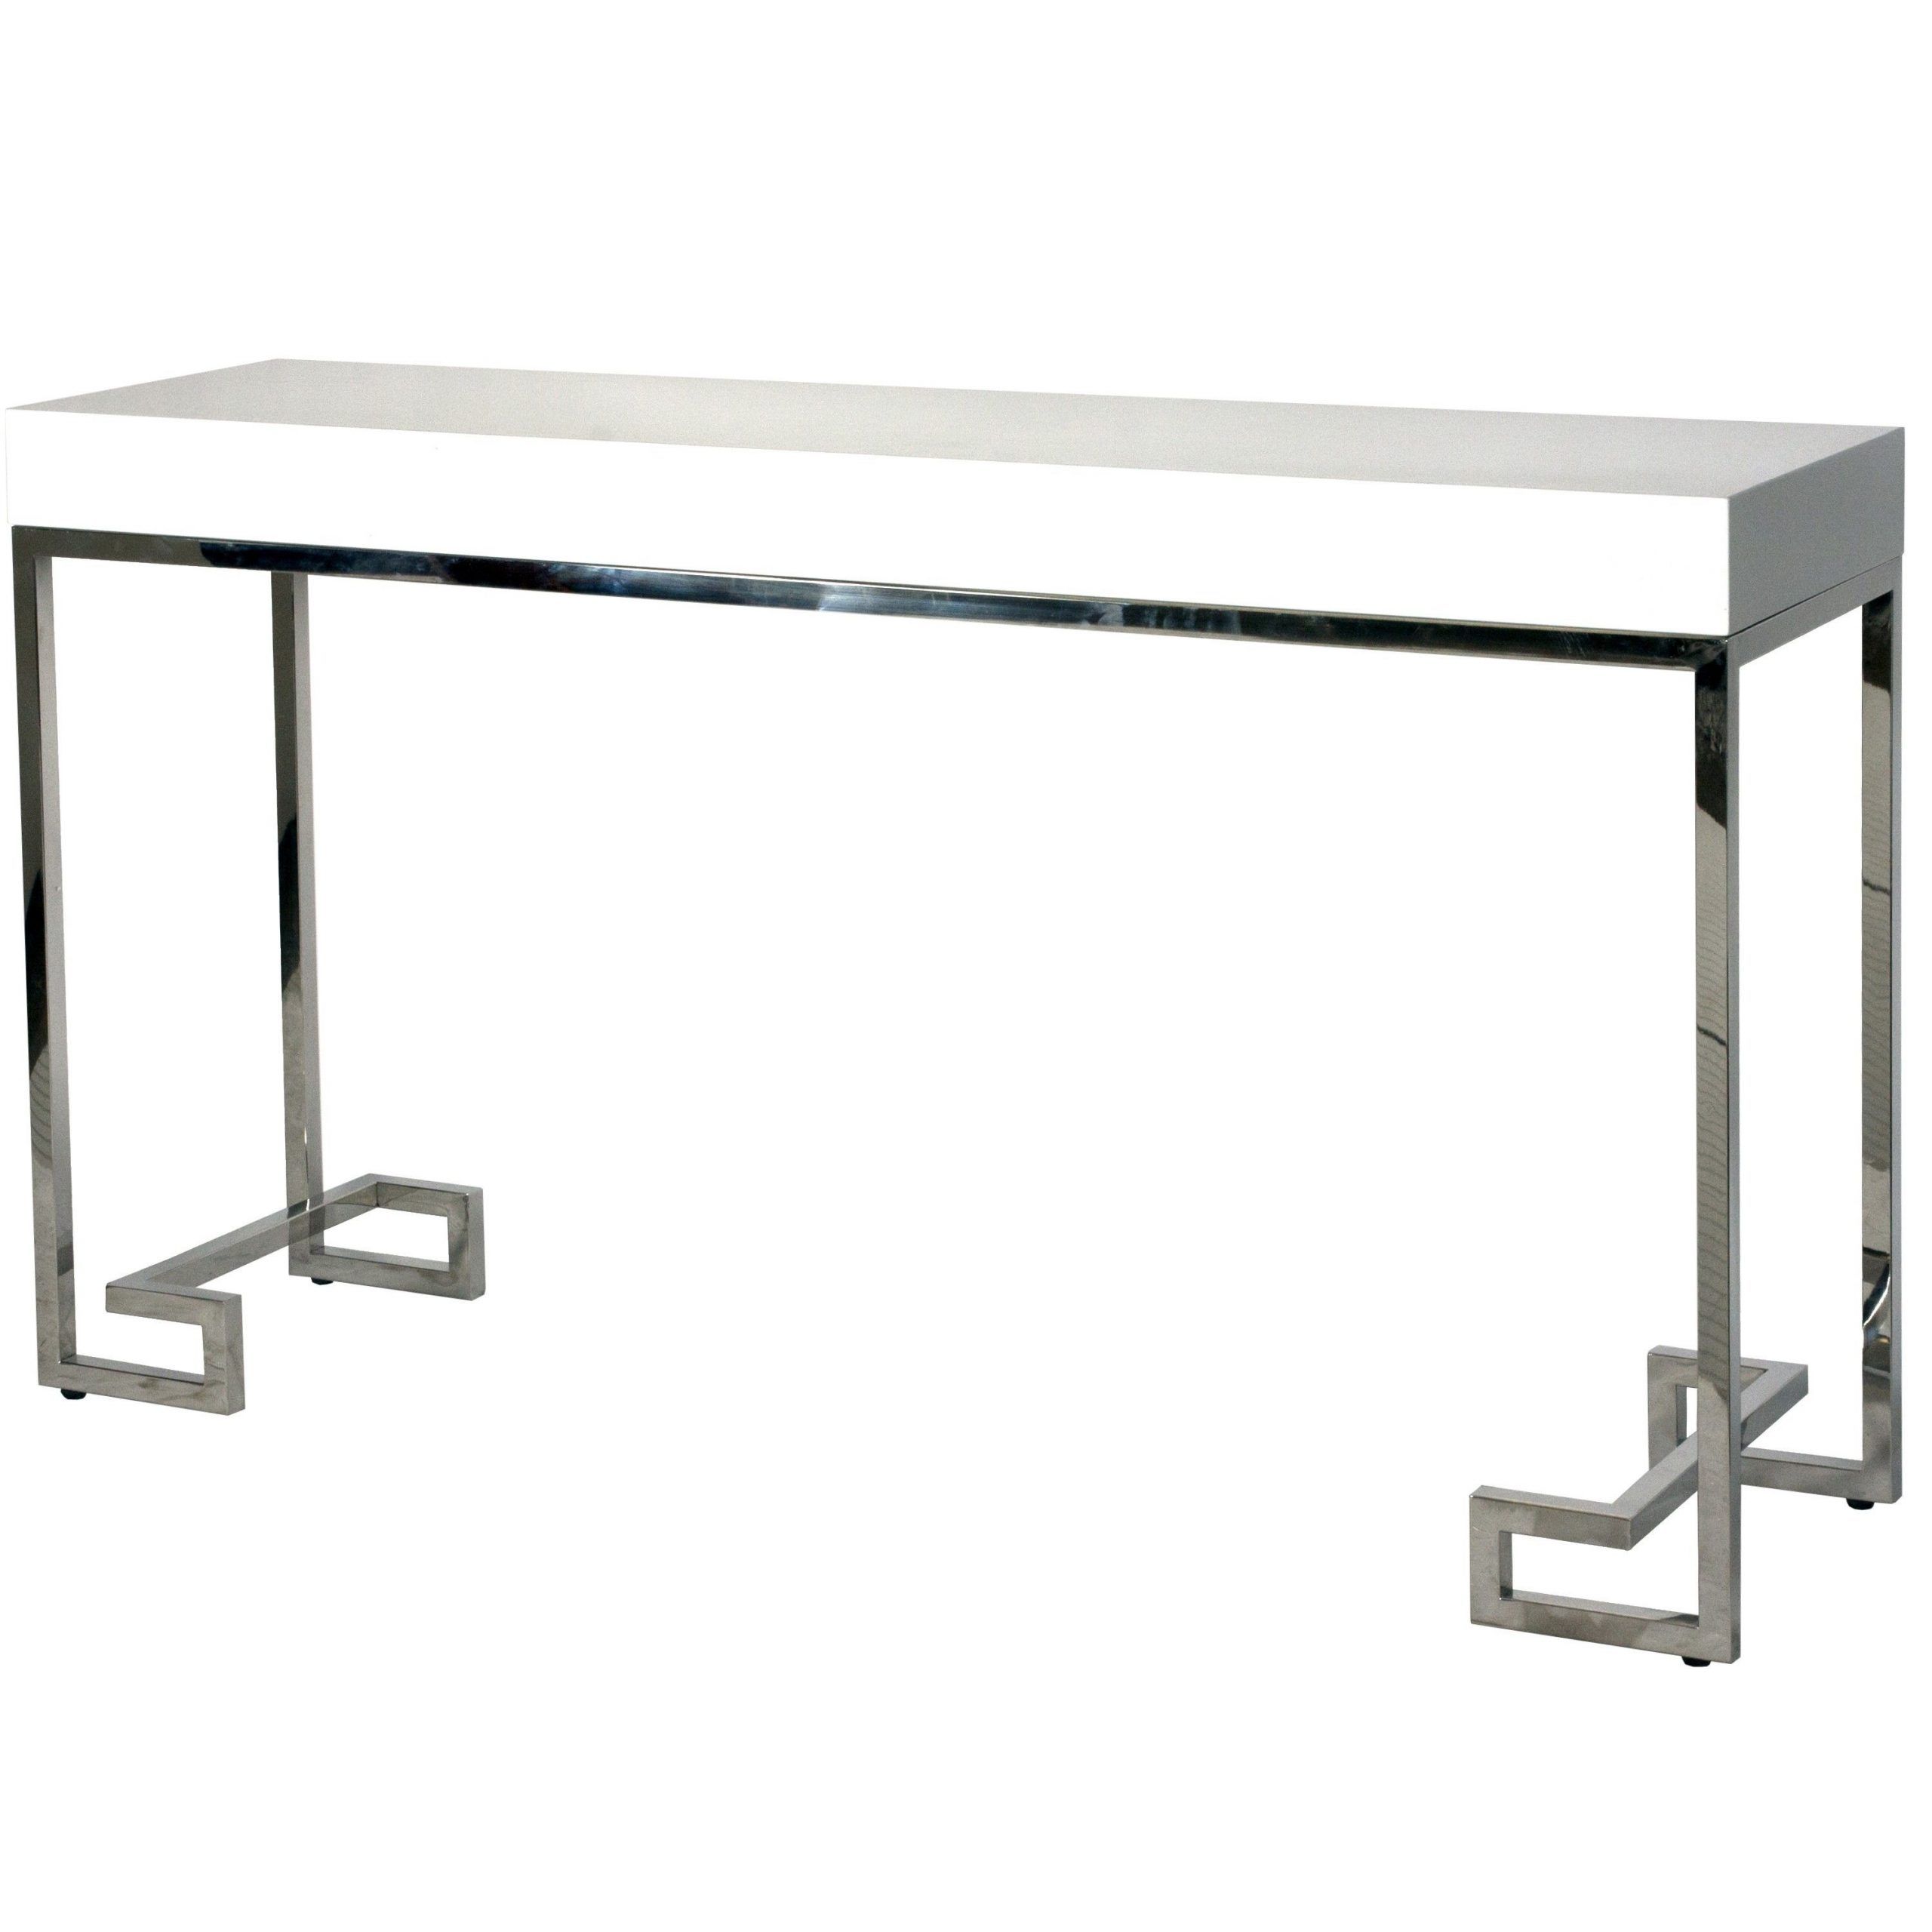 Worlds Away Barsanti Console White/silver | Candelabra With Regard To Silver Stainless Steel Console Tables (View 5 of 20)